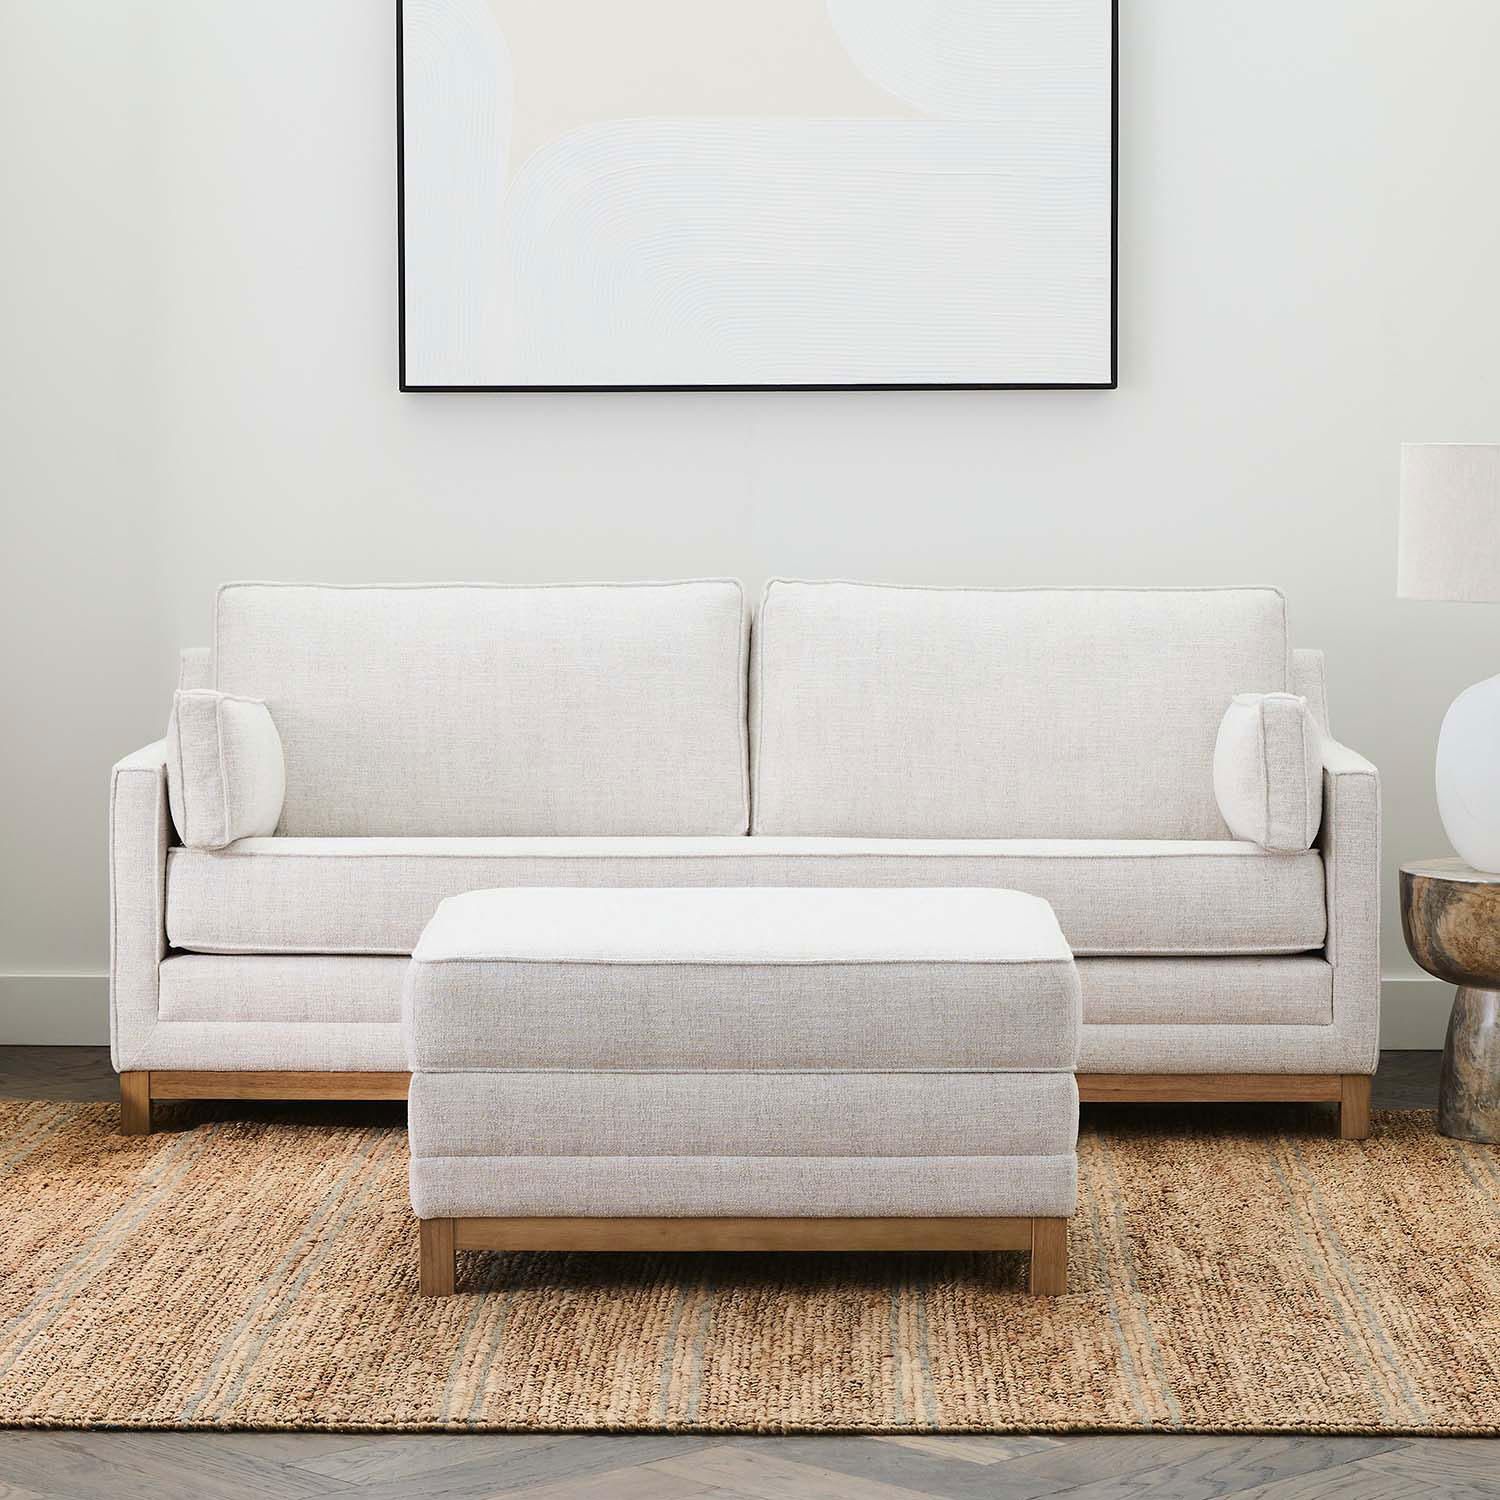 Details by Becki Owens Freesia Upholstered Sofa and Storage Ottoman | Sam's Club